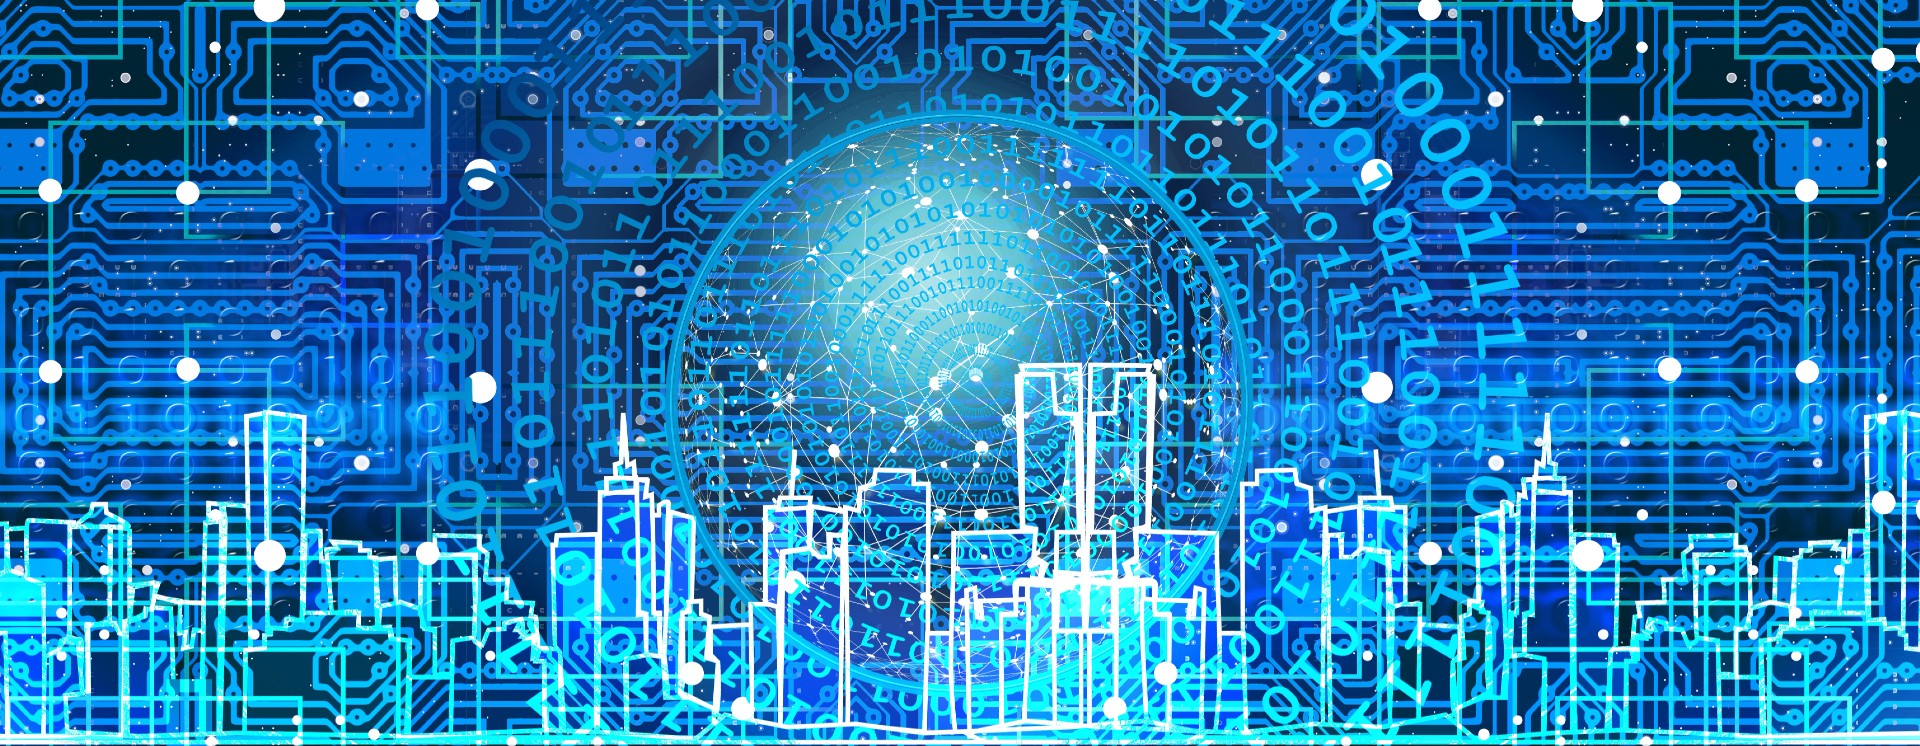 City skyline against a blue background of binary numbers and circuit boards